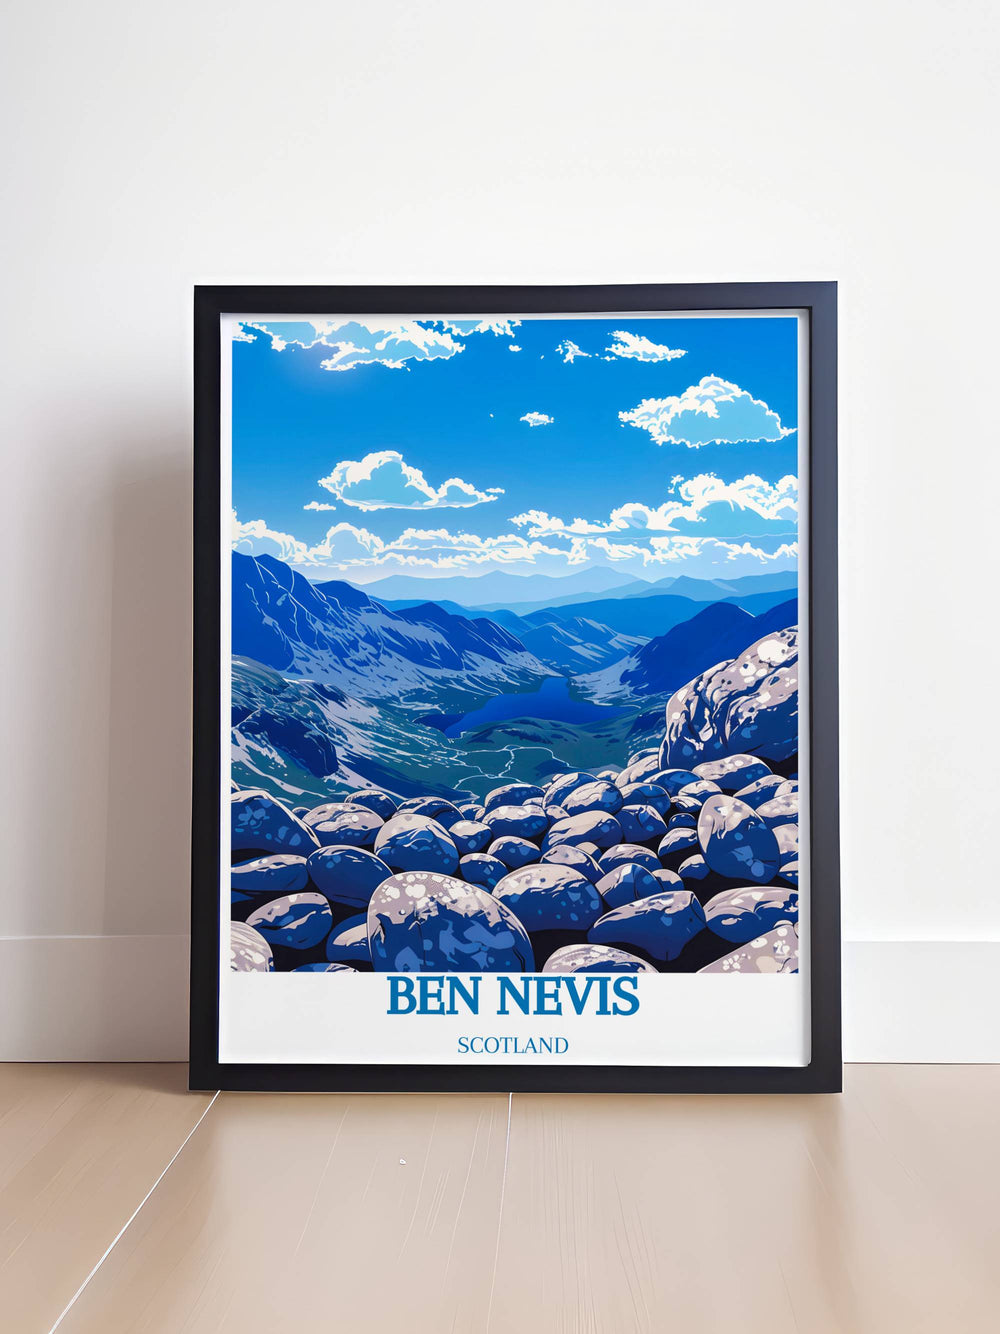 Summer scene at Ben Nevis summit wall art, displaying the lush greenery and vibrant life at Scotlands peak